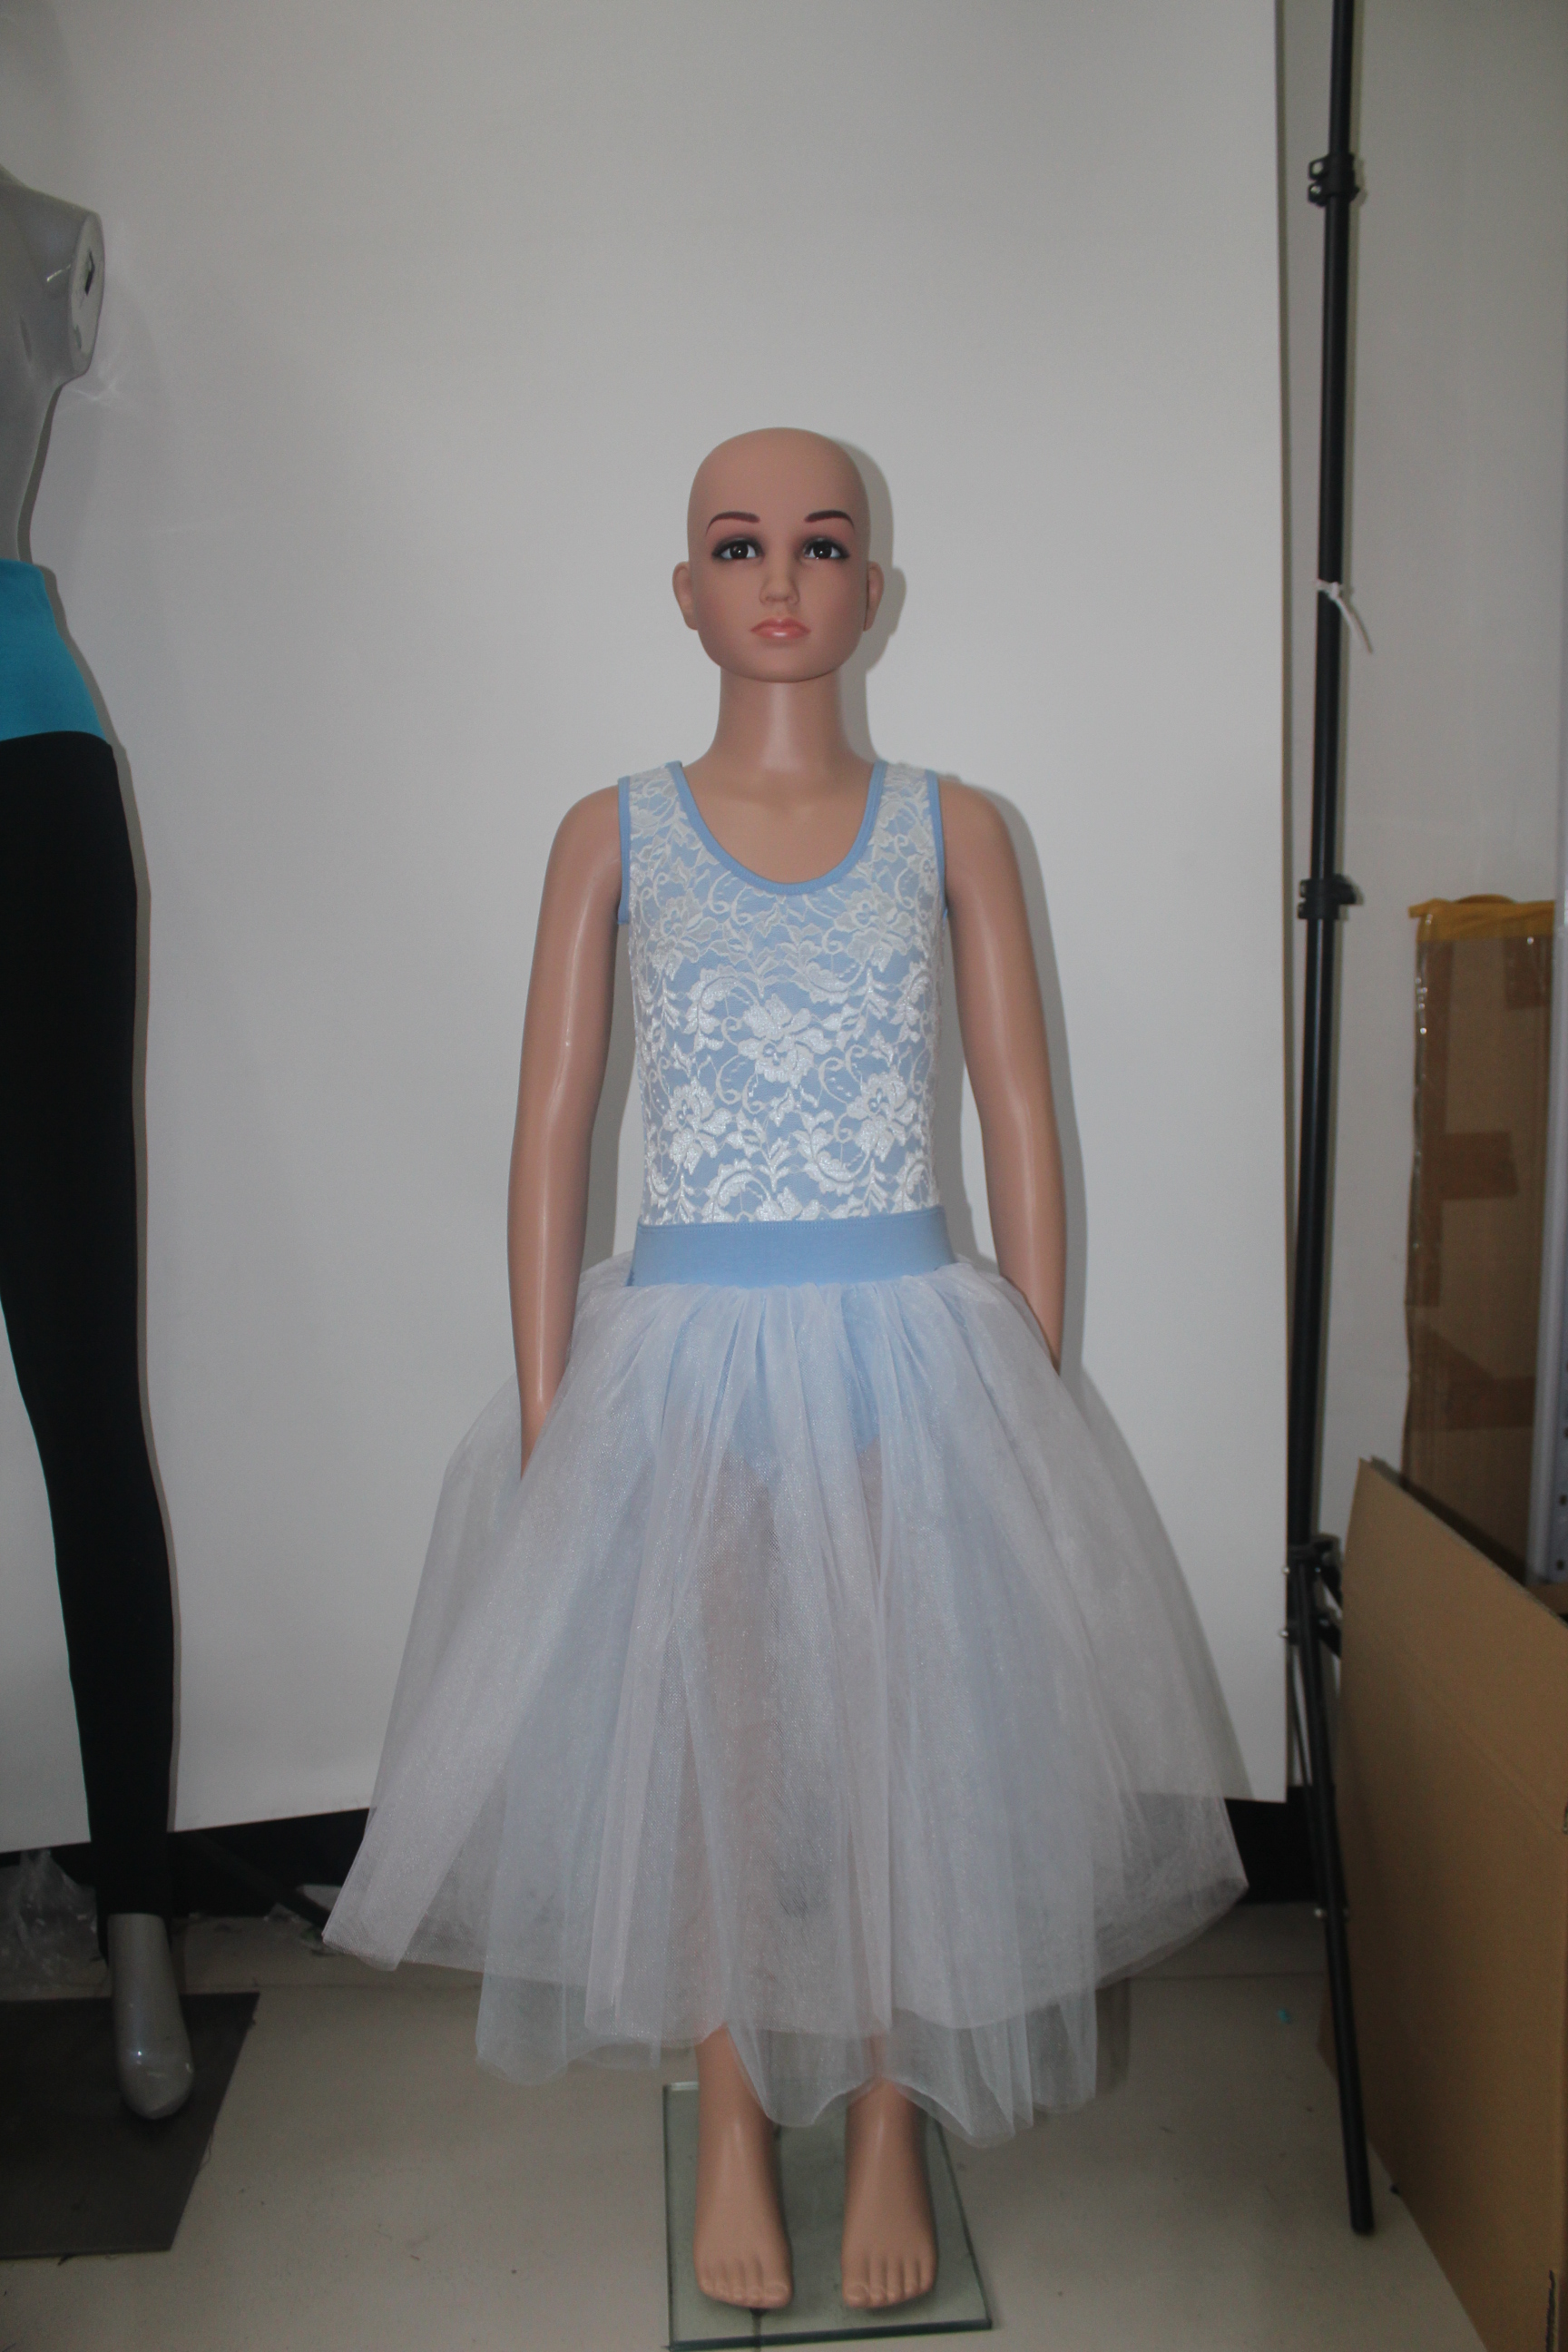 We received the latest shipment with the metallic blue dress and the lace dress that you made for us with the sky blue and white lace bodice with tulle skirt. Everyone LOVES the blue and white dress, it is very beautiful. And the metallic blue one is a lot of fun for one of our jazz classes. We are currently sizing the girls for these costumes and will place an order soon.
Thank you.
Rebecca